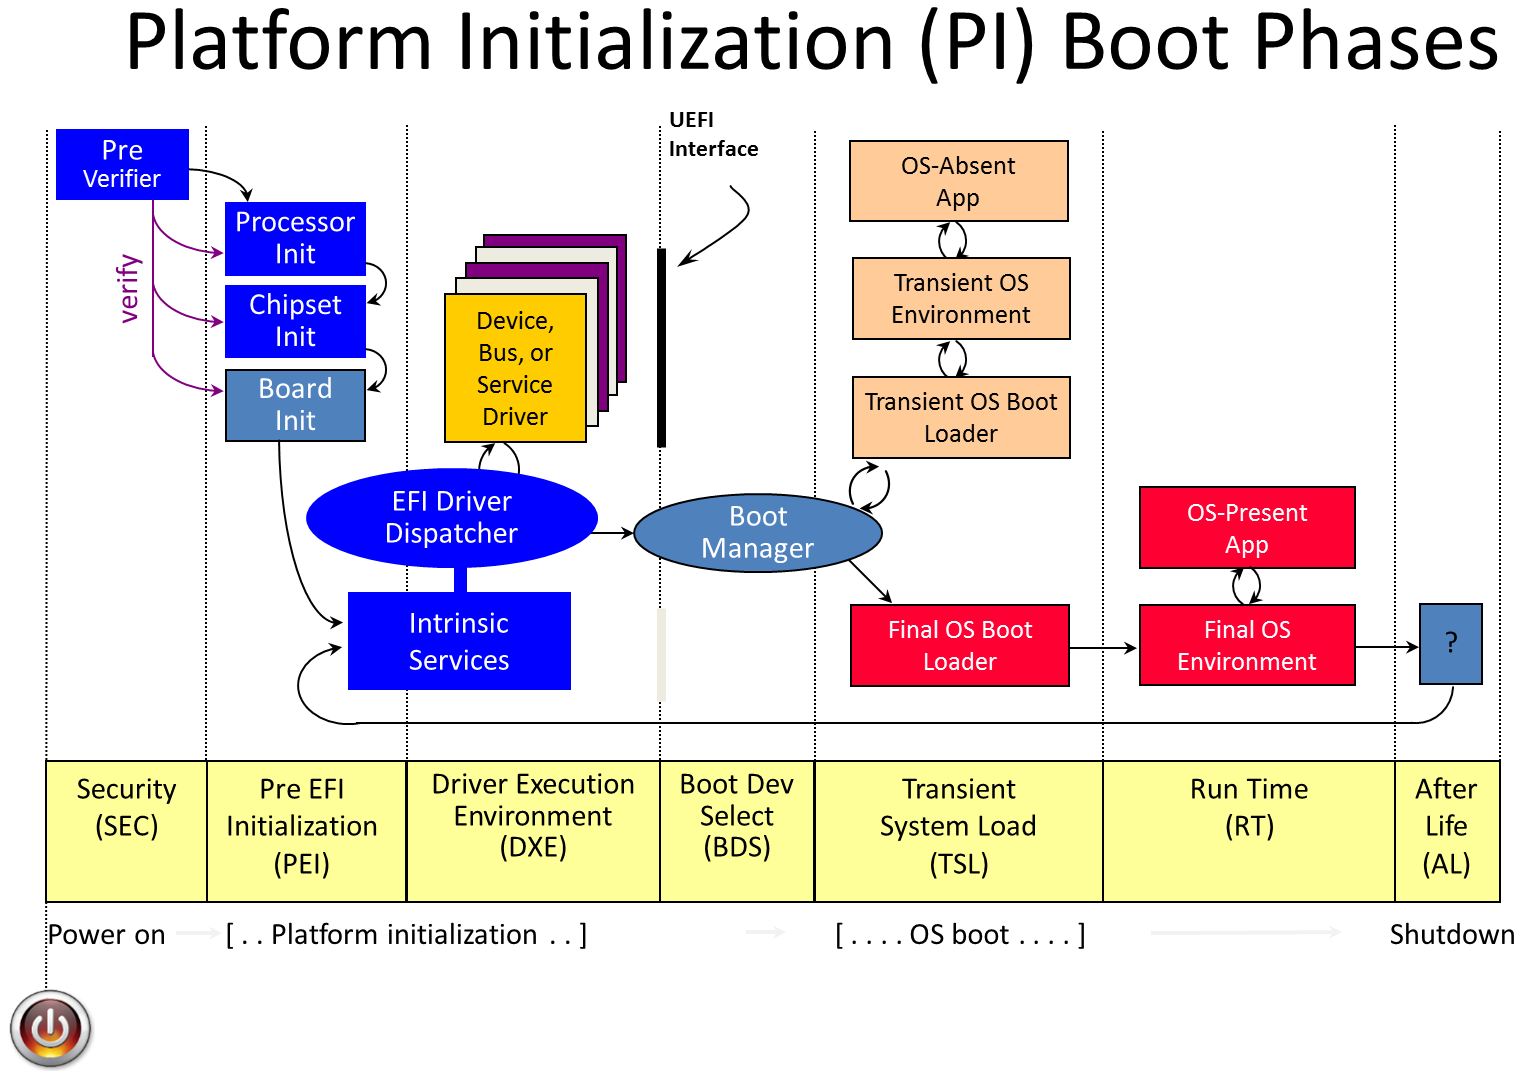 Image 6 is a diagram of the UEFI boot process. From left to right: Security, Pre-EFI initialization, Driver Execution environment, Boot Dev Select, transient system load, run time, and after life. There are multiple steps in each of these sections. 